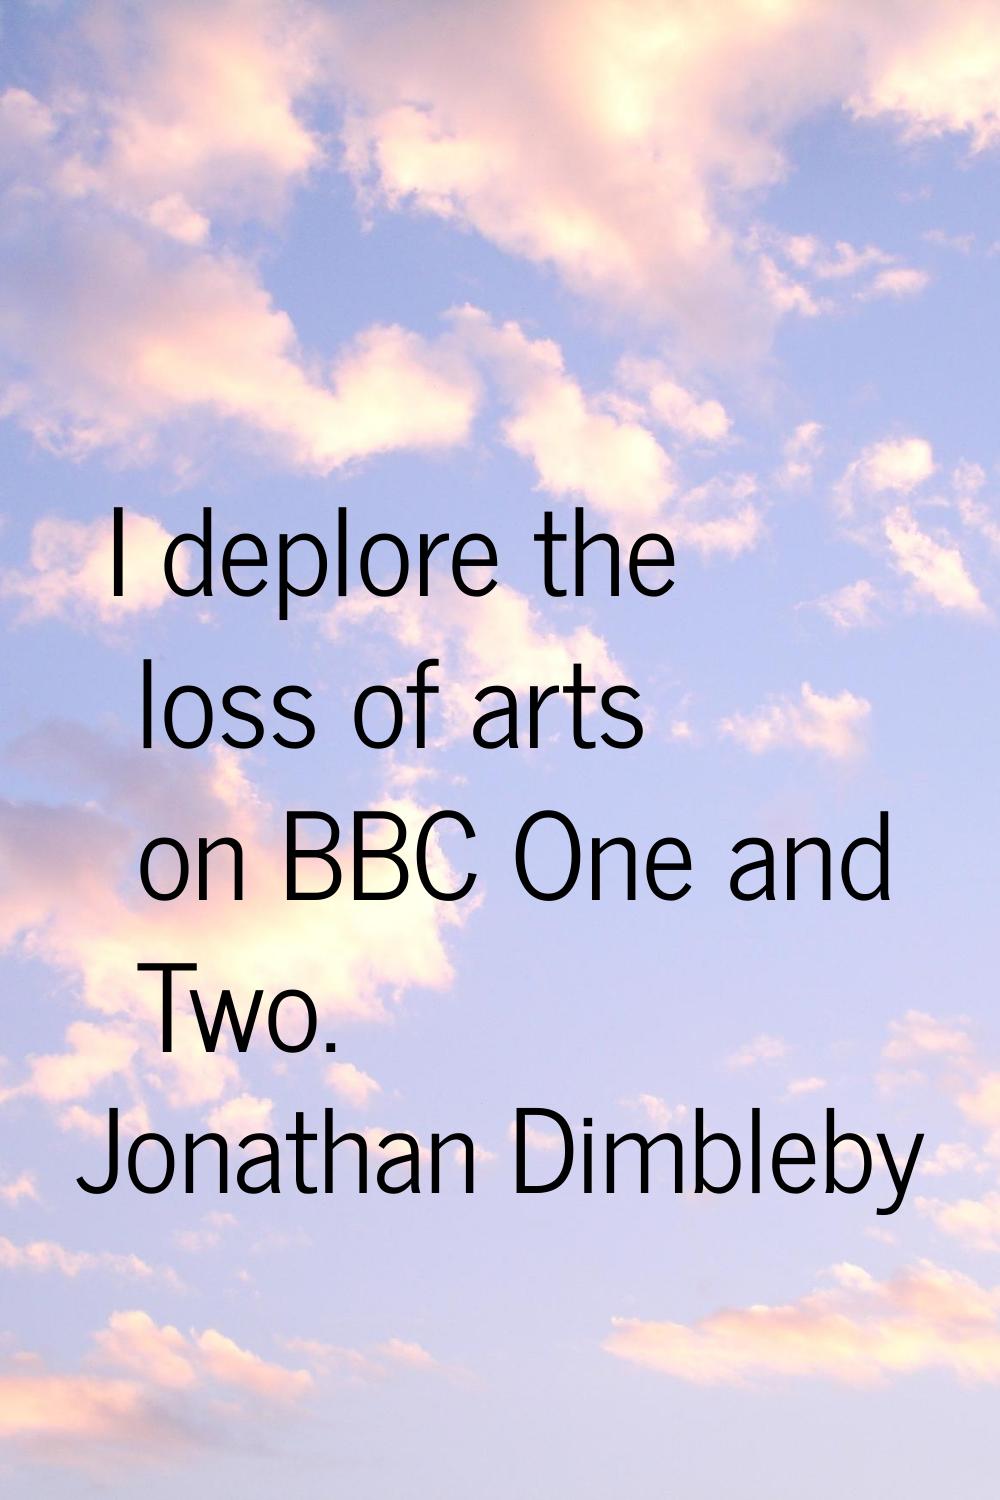 I deplore the loss of arts on BBC One and Two.